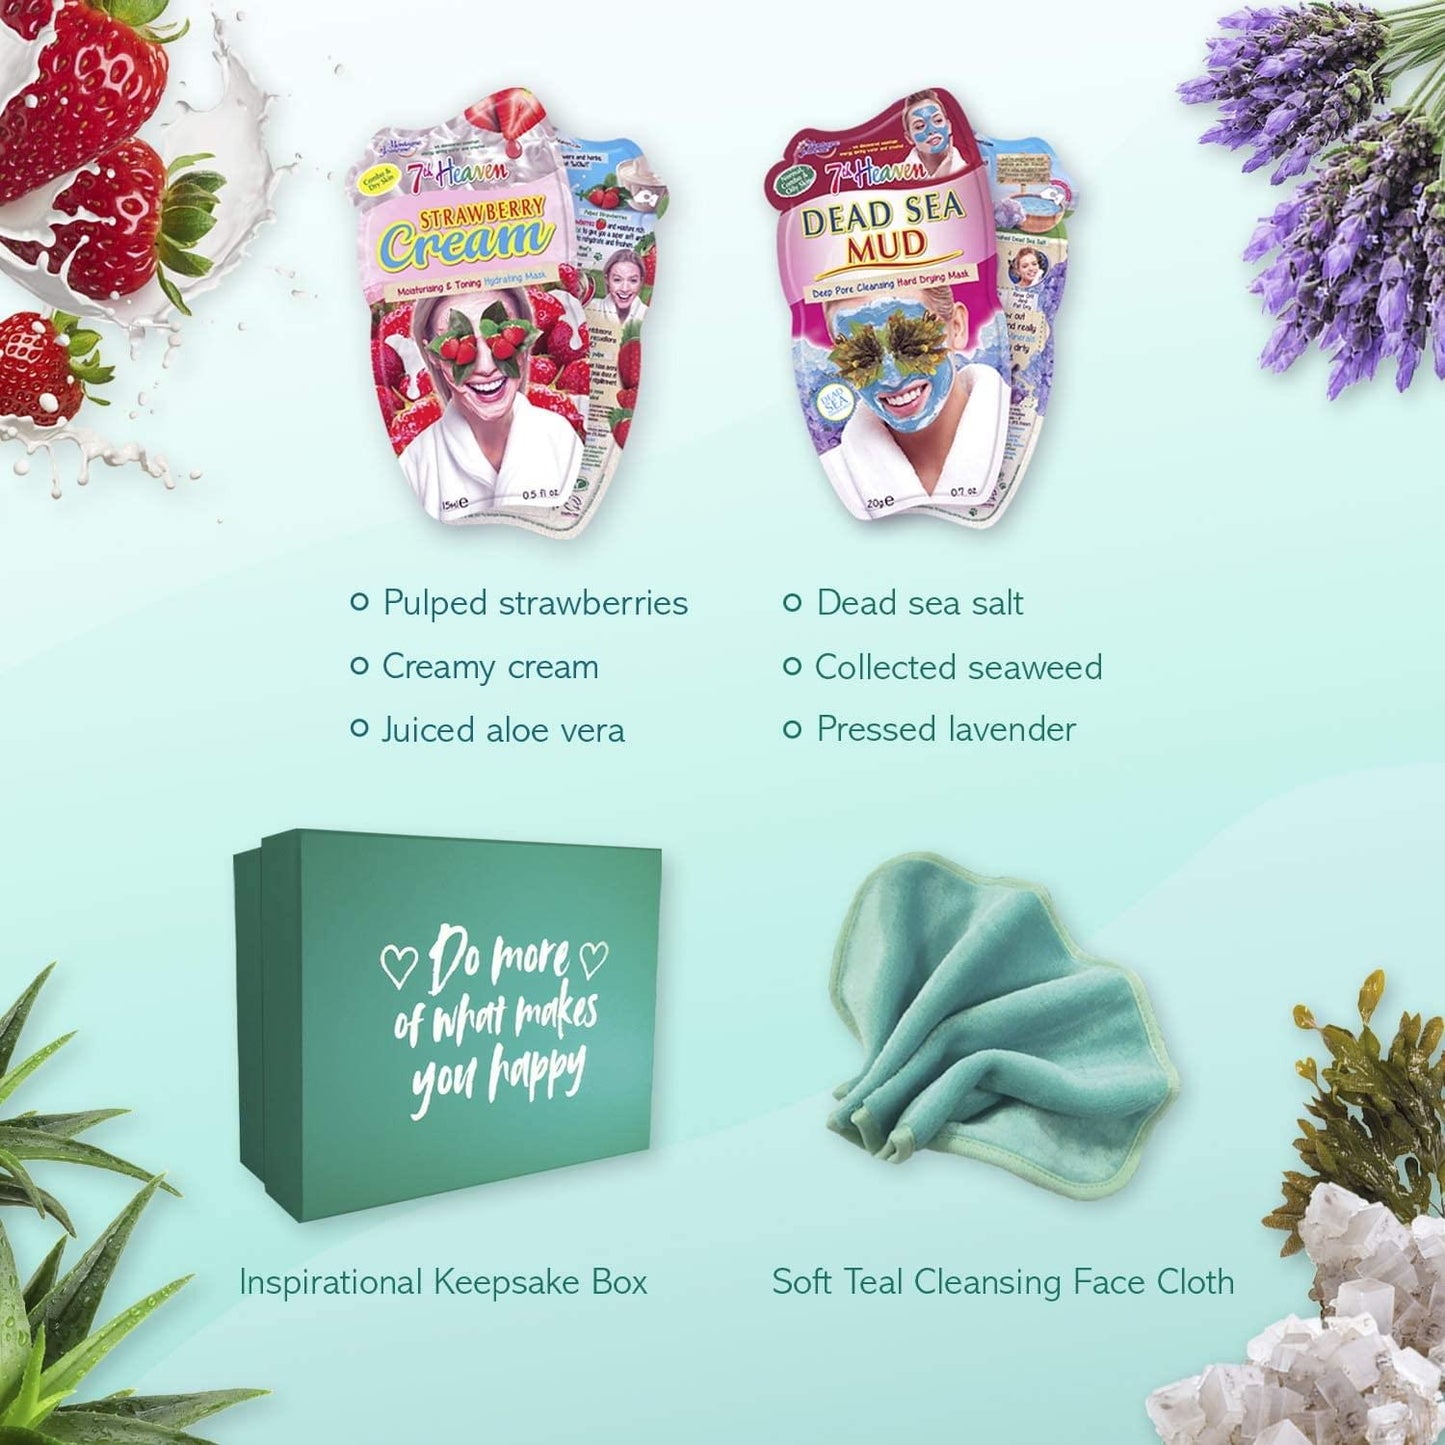 7th Heaven Beauty Box of Treats Gift Pack with 8 Facial Skincare Masks - Includes a Decorated Keepsake Box and Cleansing Face Cloth